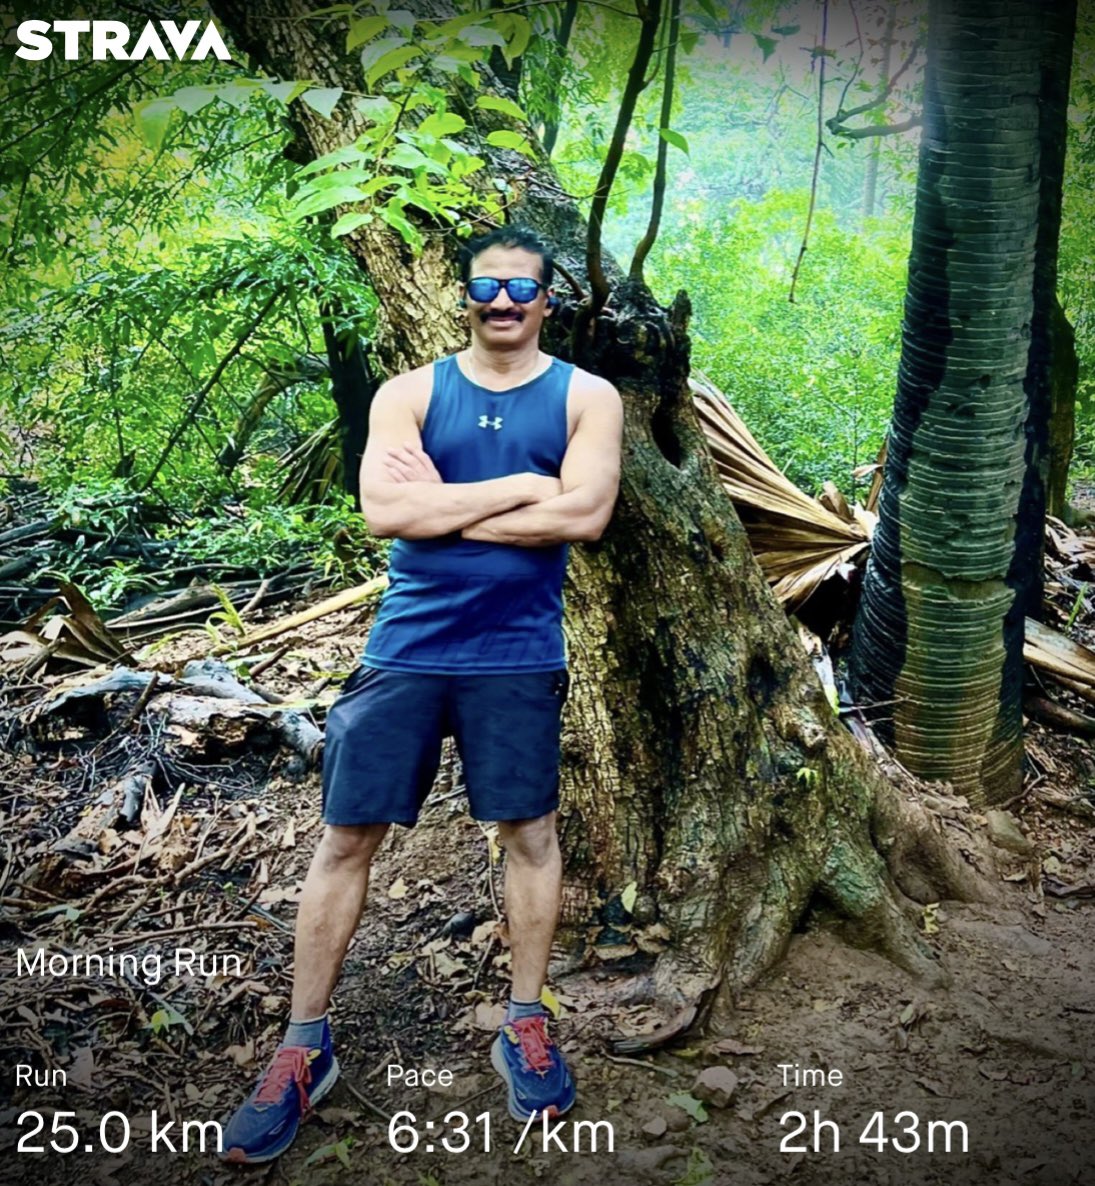 Hot and humid, but not as brutal as last week! Grateful to IIT Madras for the cool breeze under the tall trees ... the perfect fuel for a 25 km journey. Today short on sleep, but long on determination! #PowerOfRunning #MindOverMatter #run #Running #Runner #halfmarathon.